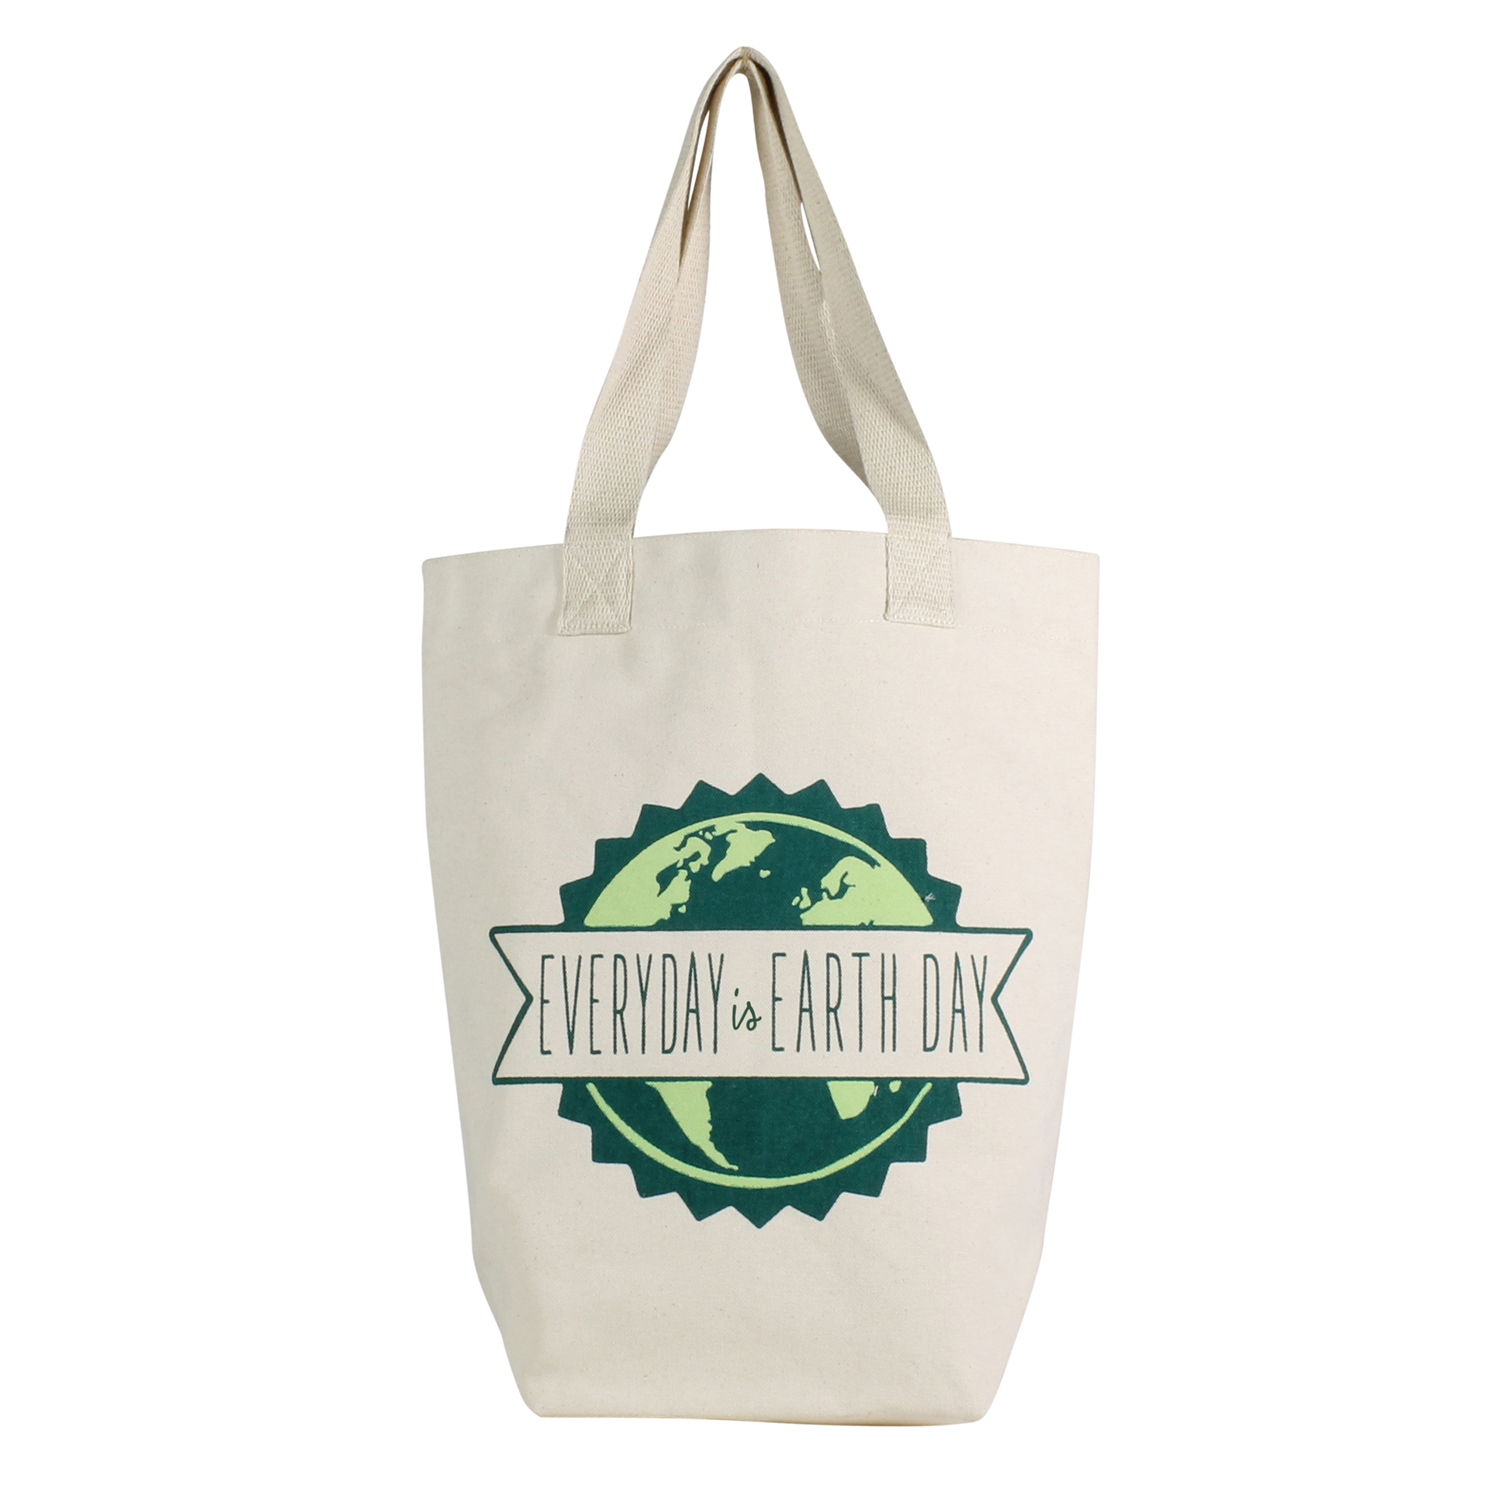 Every Day is Earth Day Farmer Market Tote by HomArt - Seven Colonial